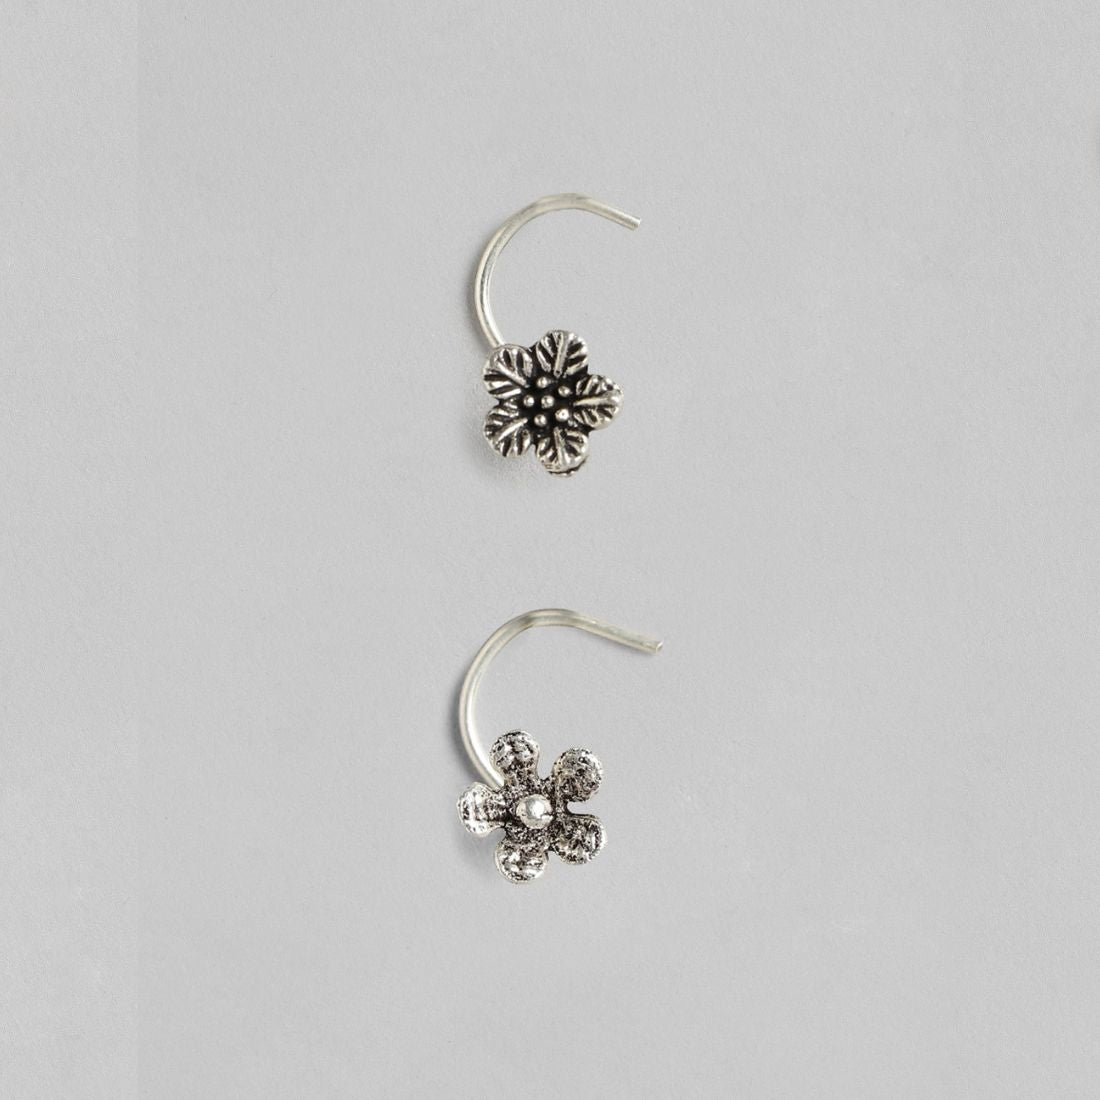 The Star 925 Silver Nose Pin Set